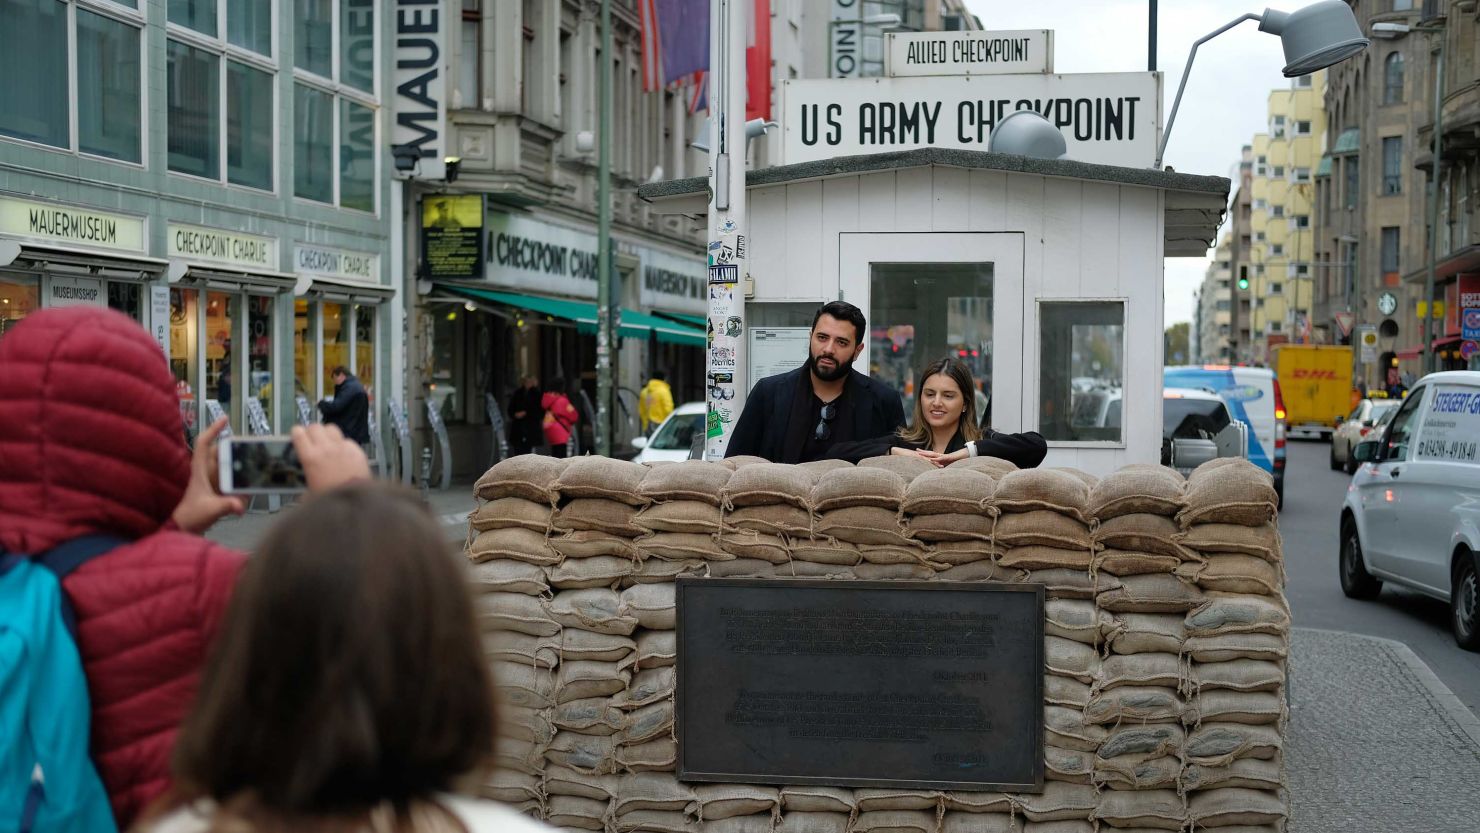 Checkpoint Charlie has become a major tourist attraction since the fall of the Berlin Wall in 1989.